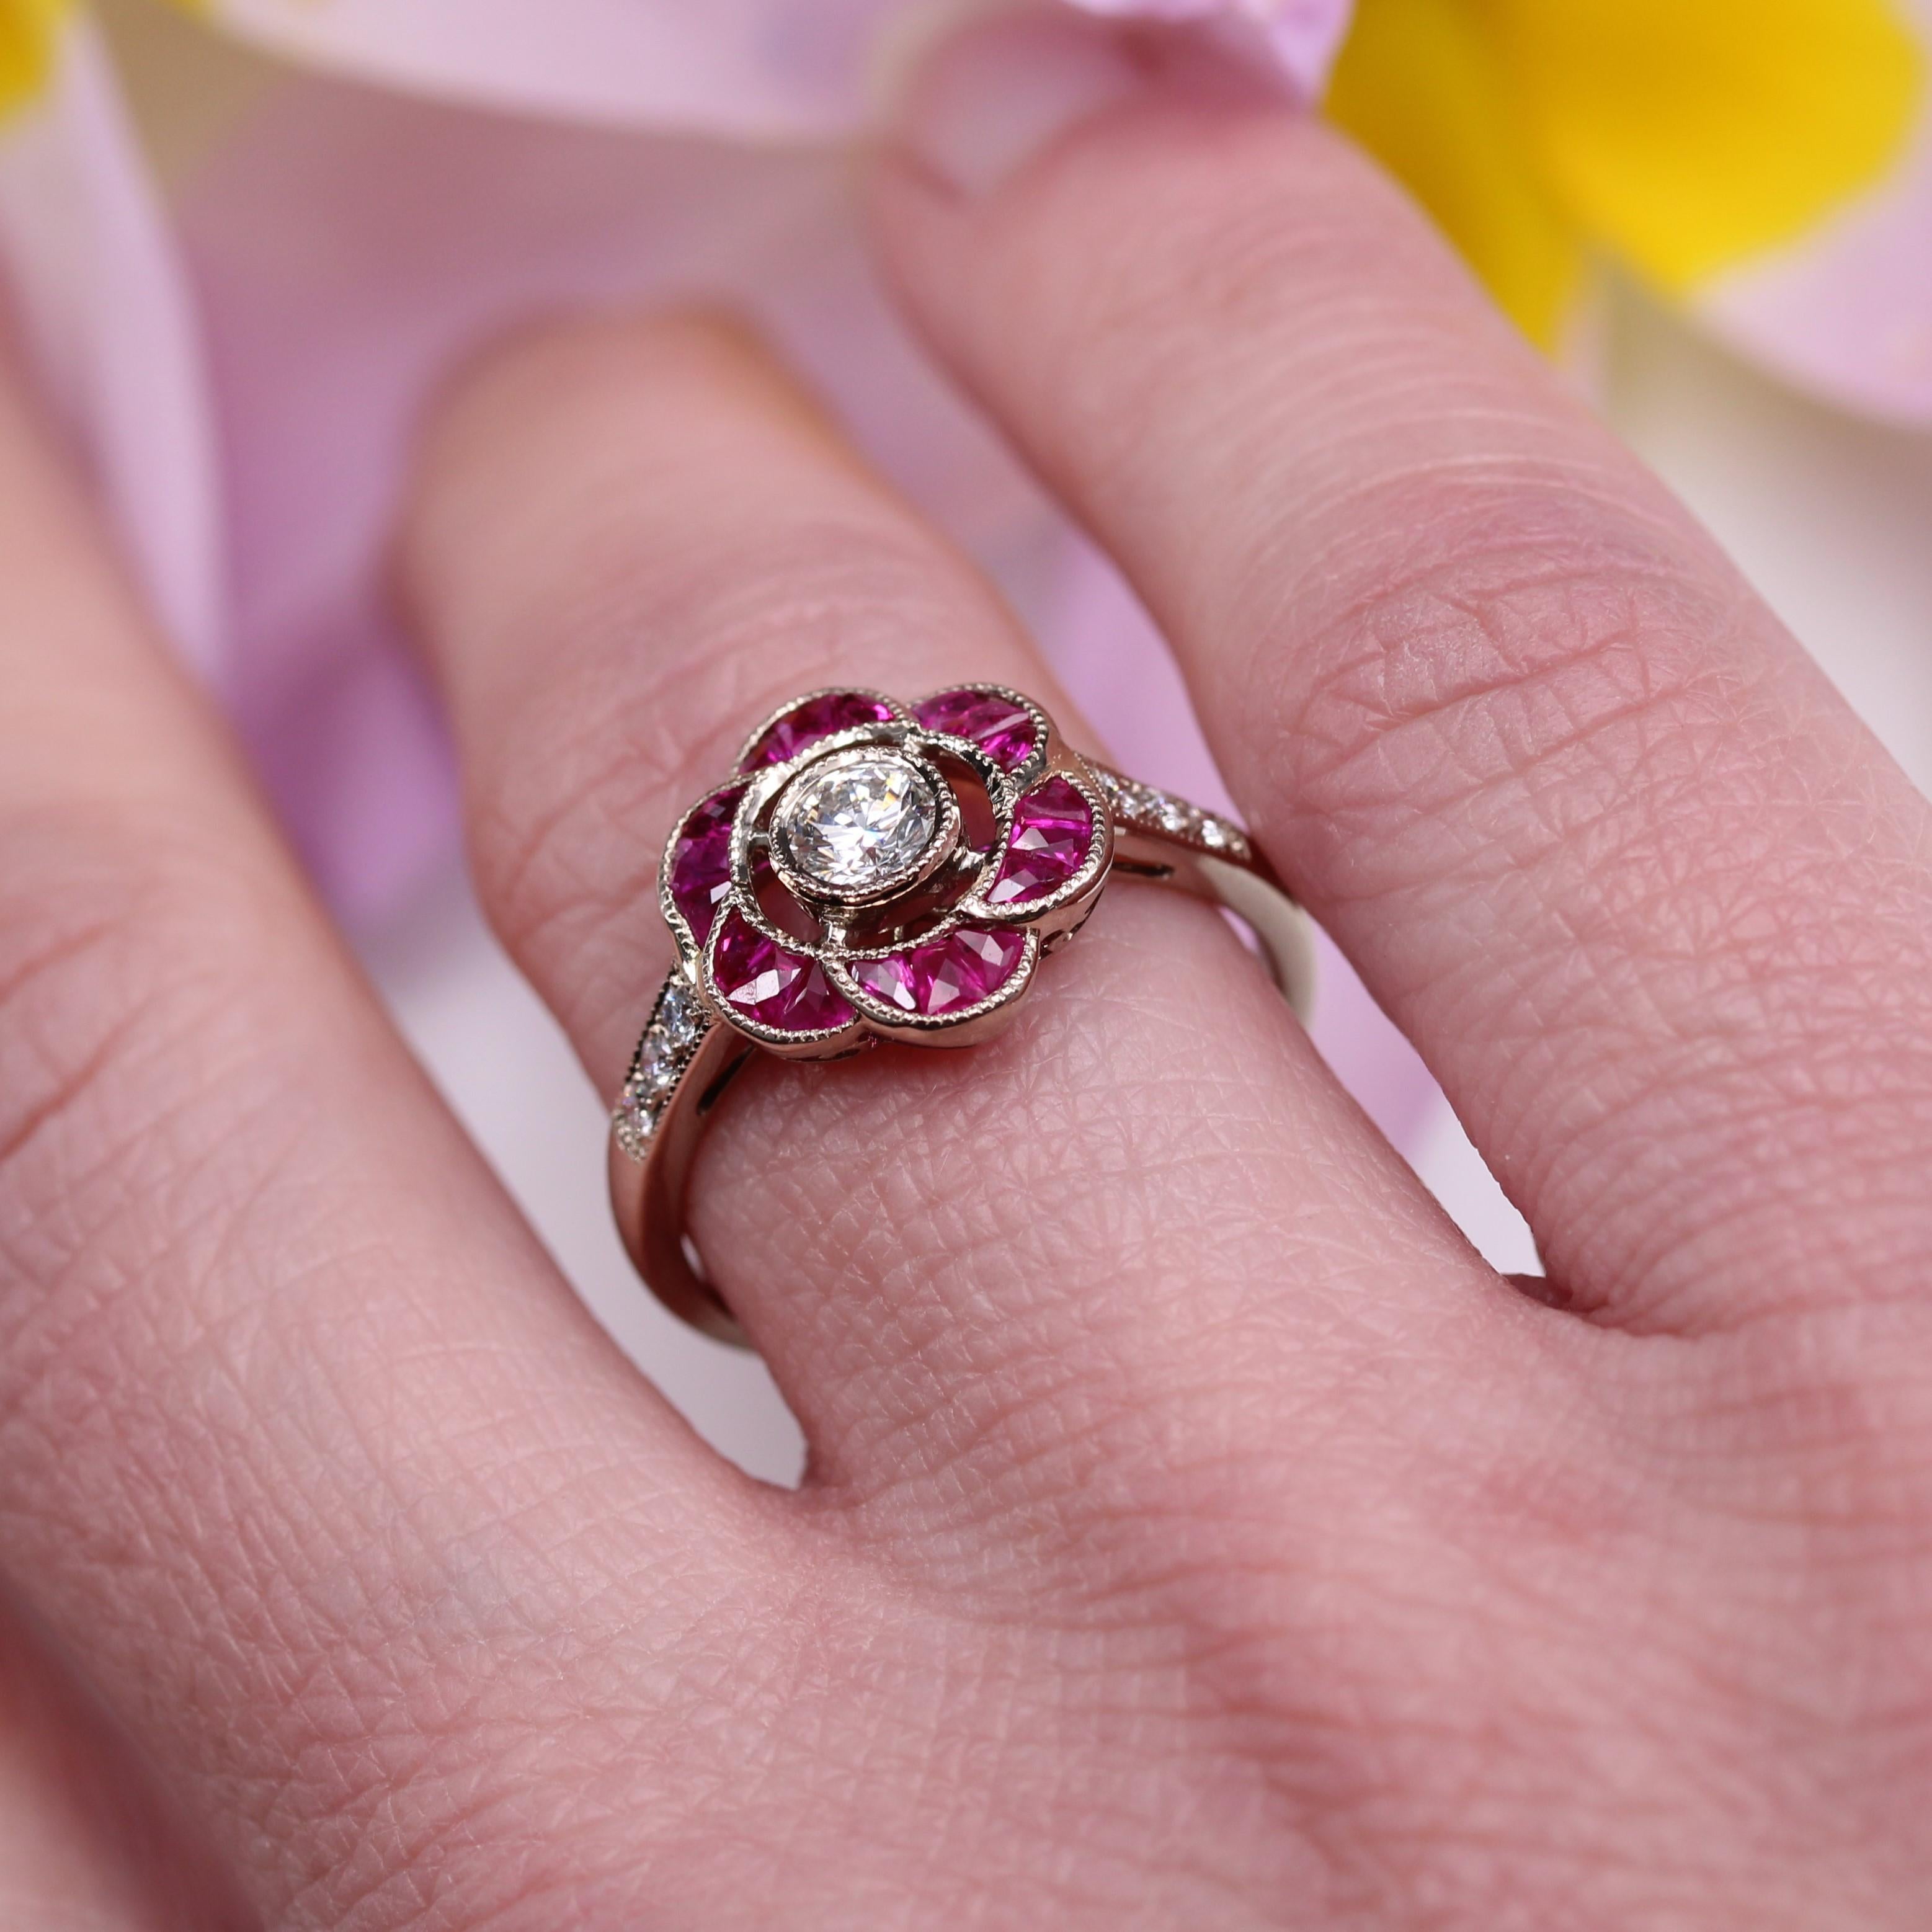 New Art Deco Style Calibrated Rubies Diamonds 18 Karat White Gold Flower Ring For Sale 9